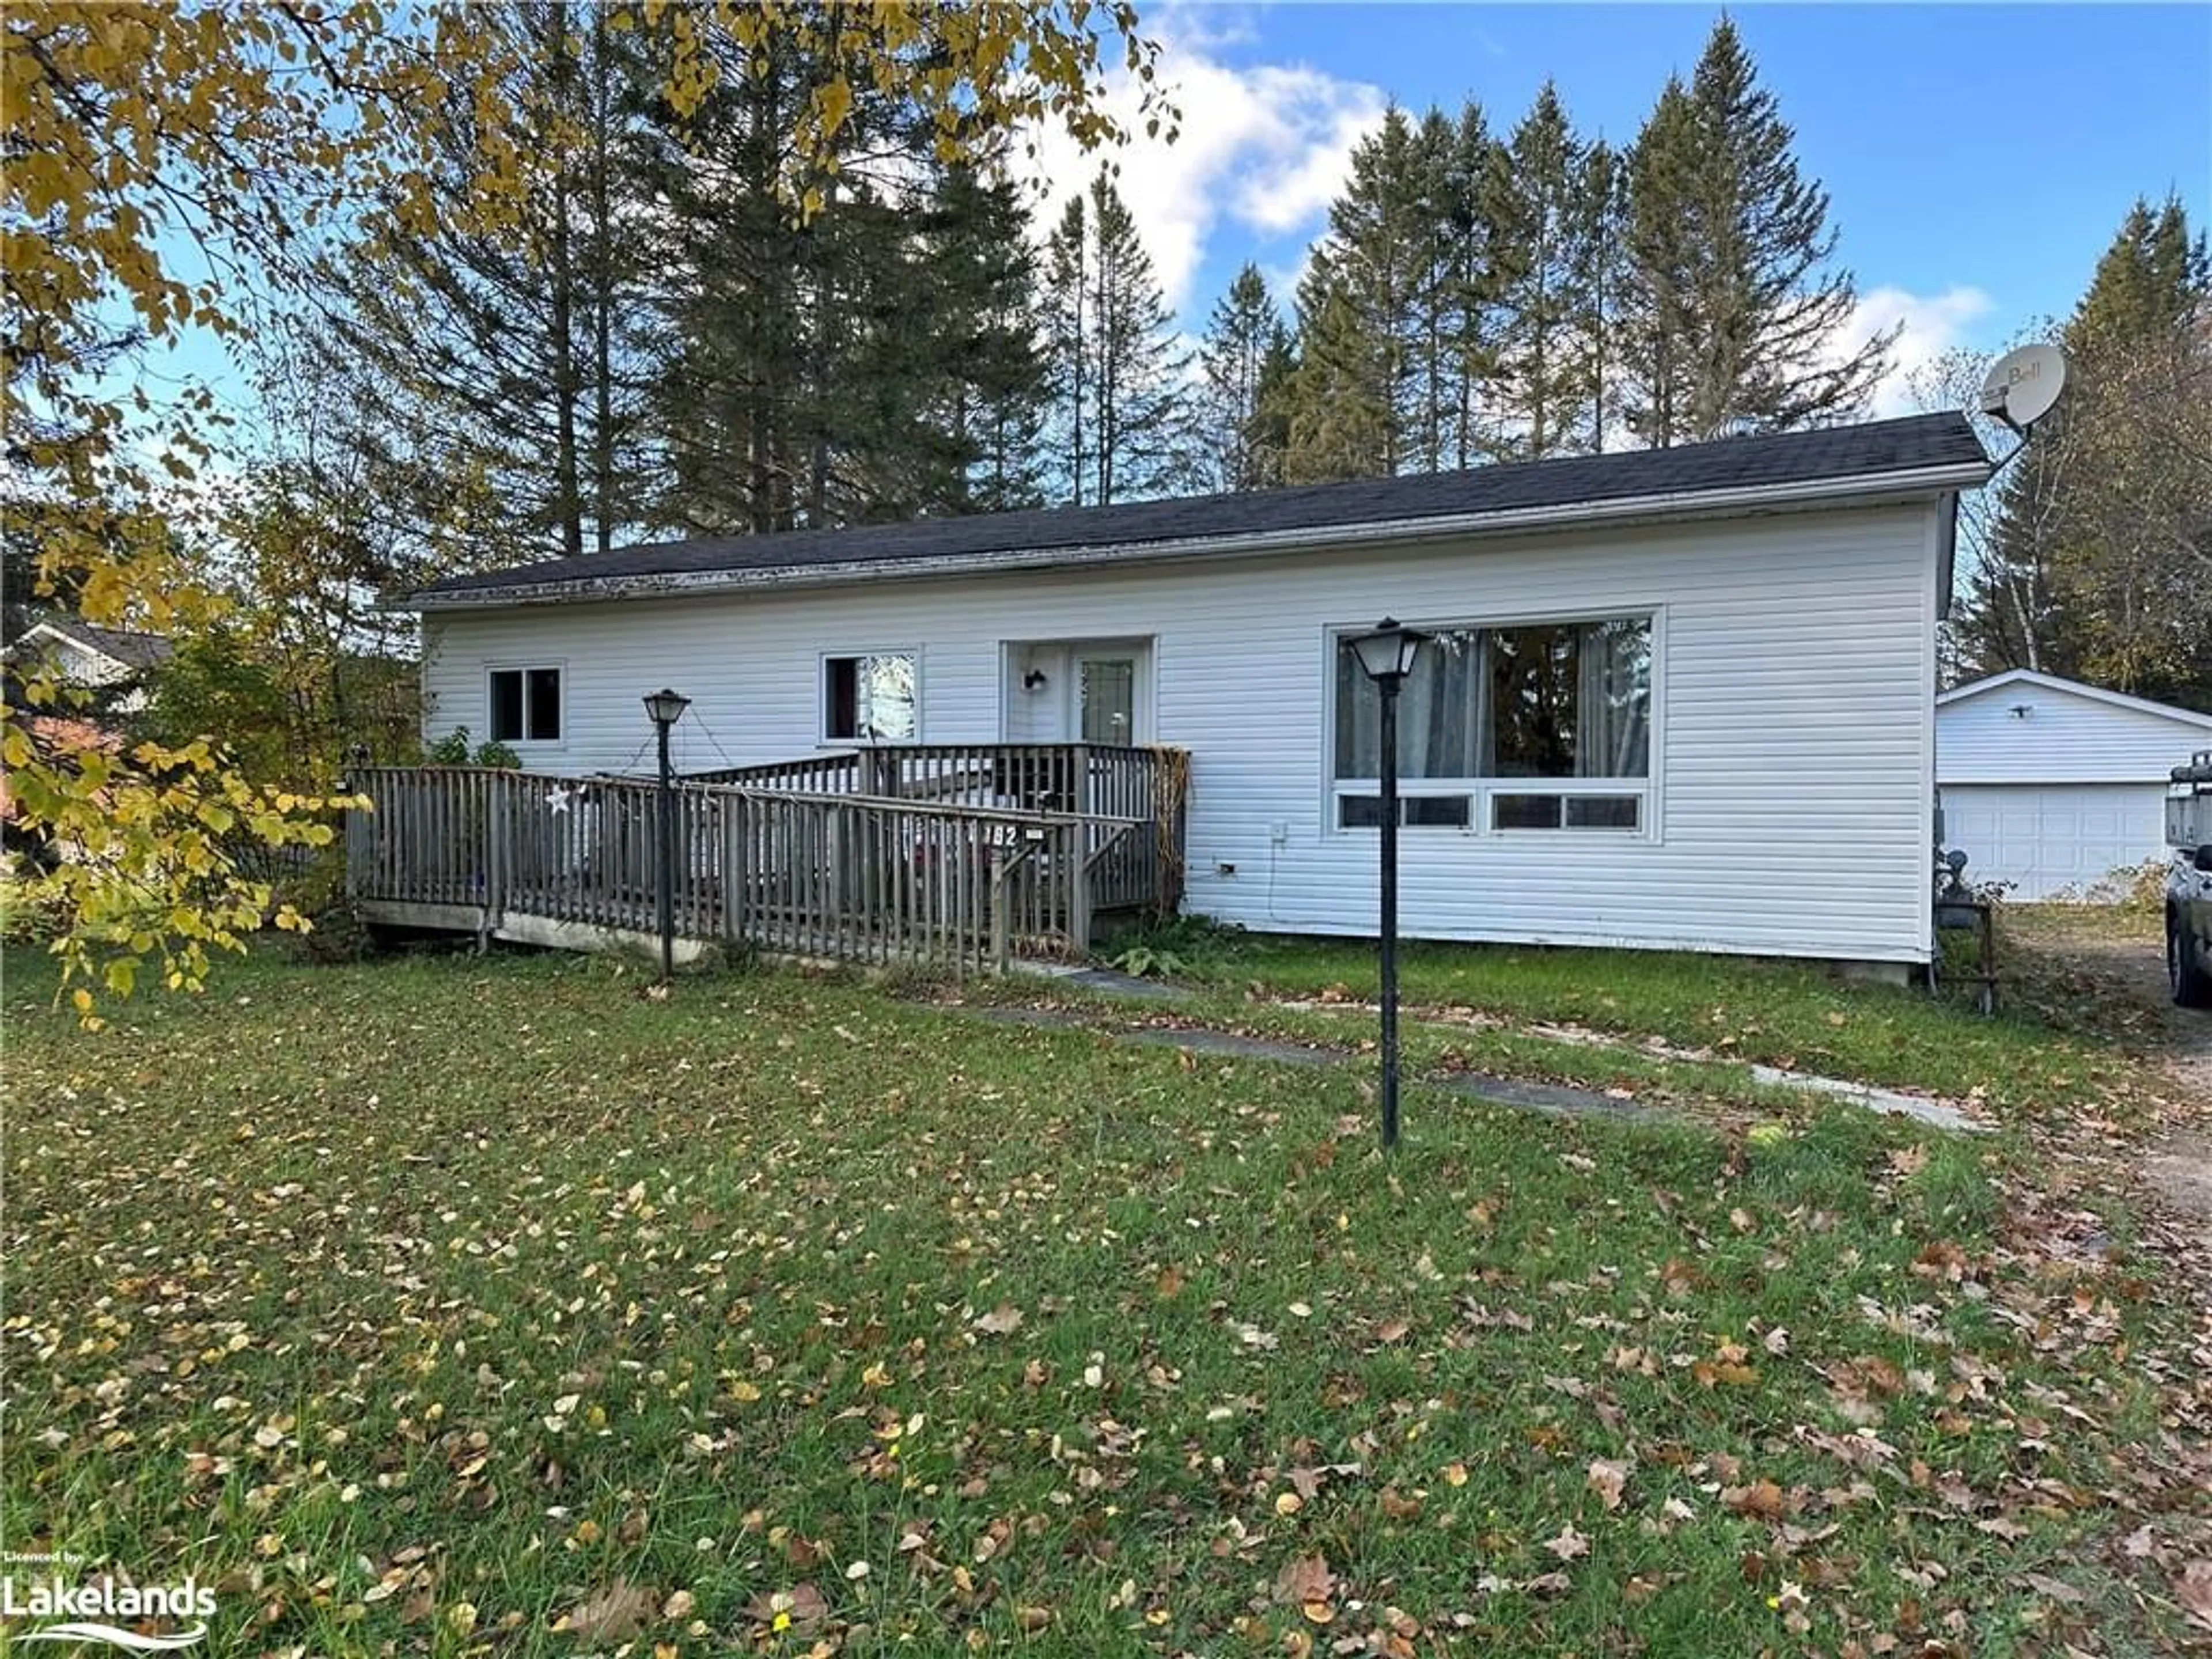 Cottage for 162 Ottawa Ave, South River Ontario P0A 1X0